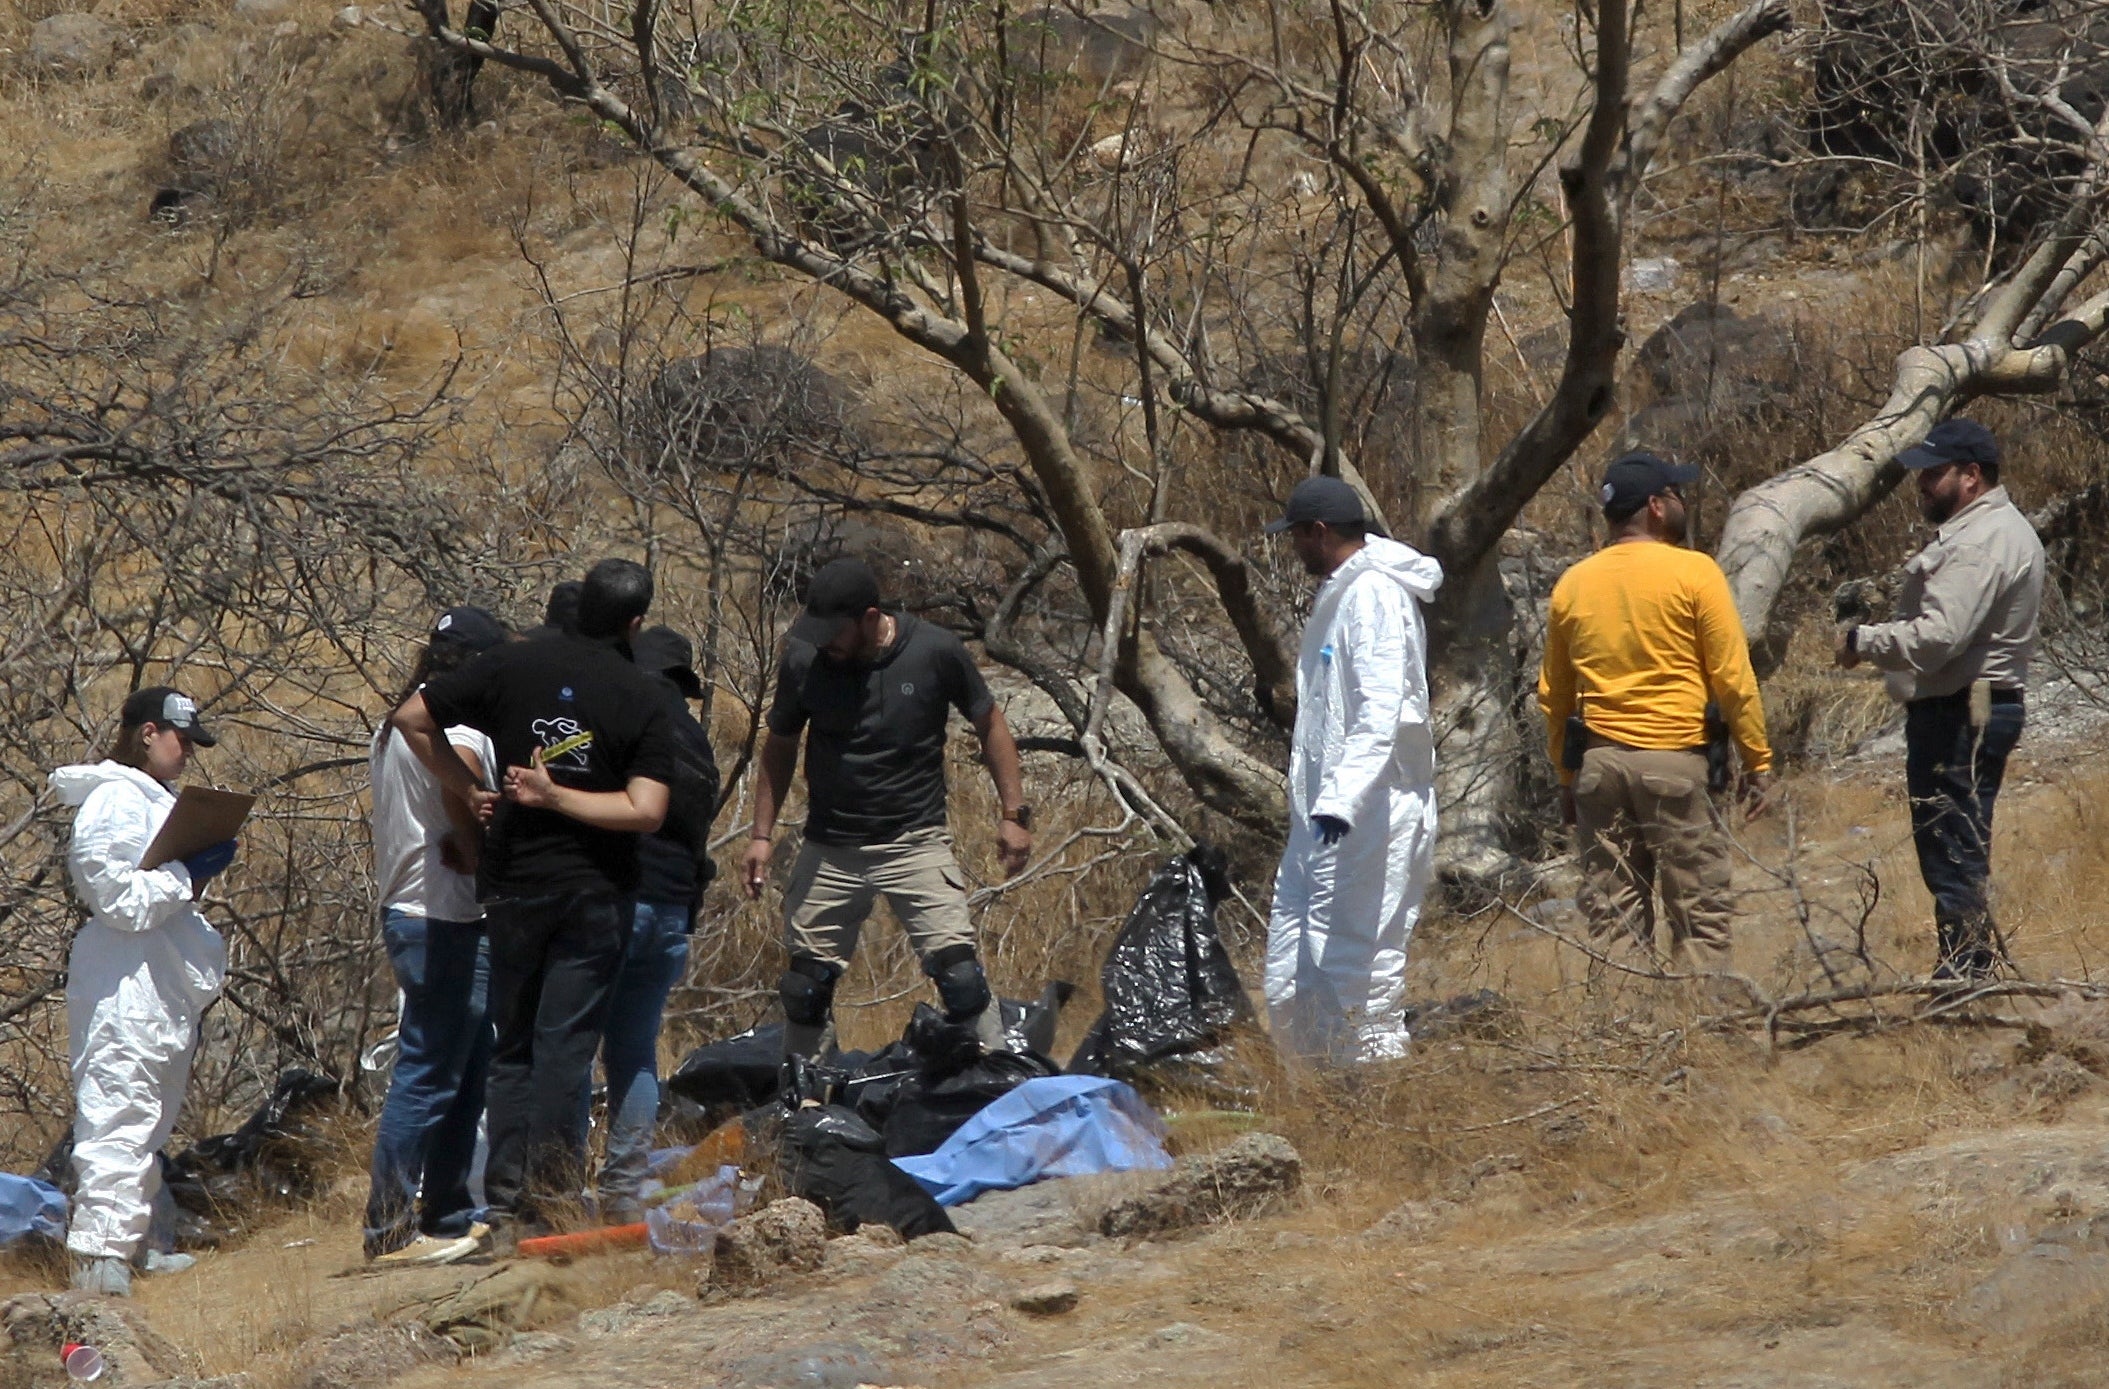 Forensic experts work with several bags of human remains extracted from the bottom of a ravine by a helicopter, which were abandoned at the Mirador Escondido community in Zapopan, Jalisco state, Mexico on May 31, 2023